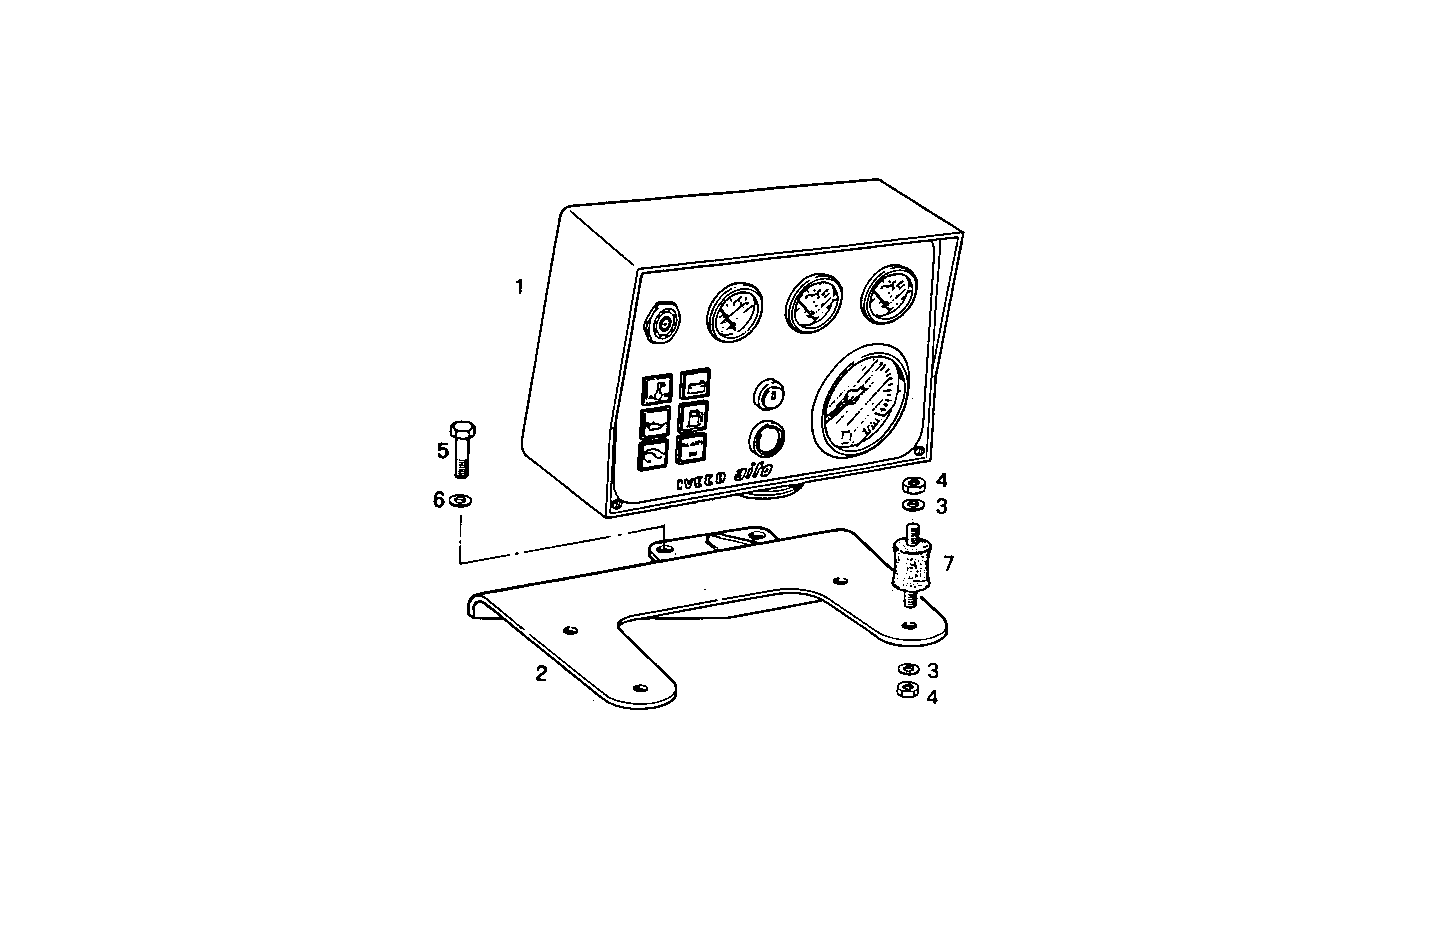 ELECTRIC INSTRUMENTS PANEL